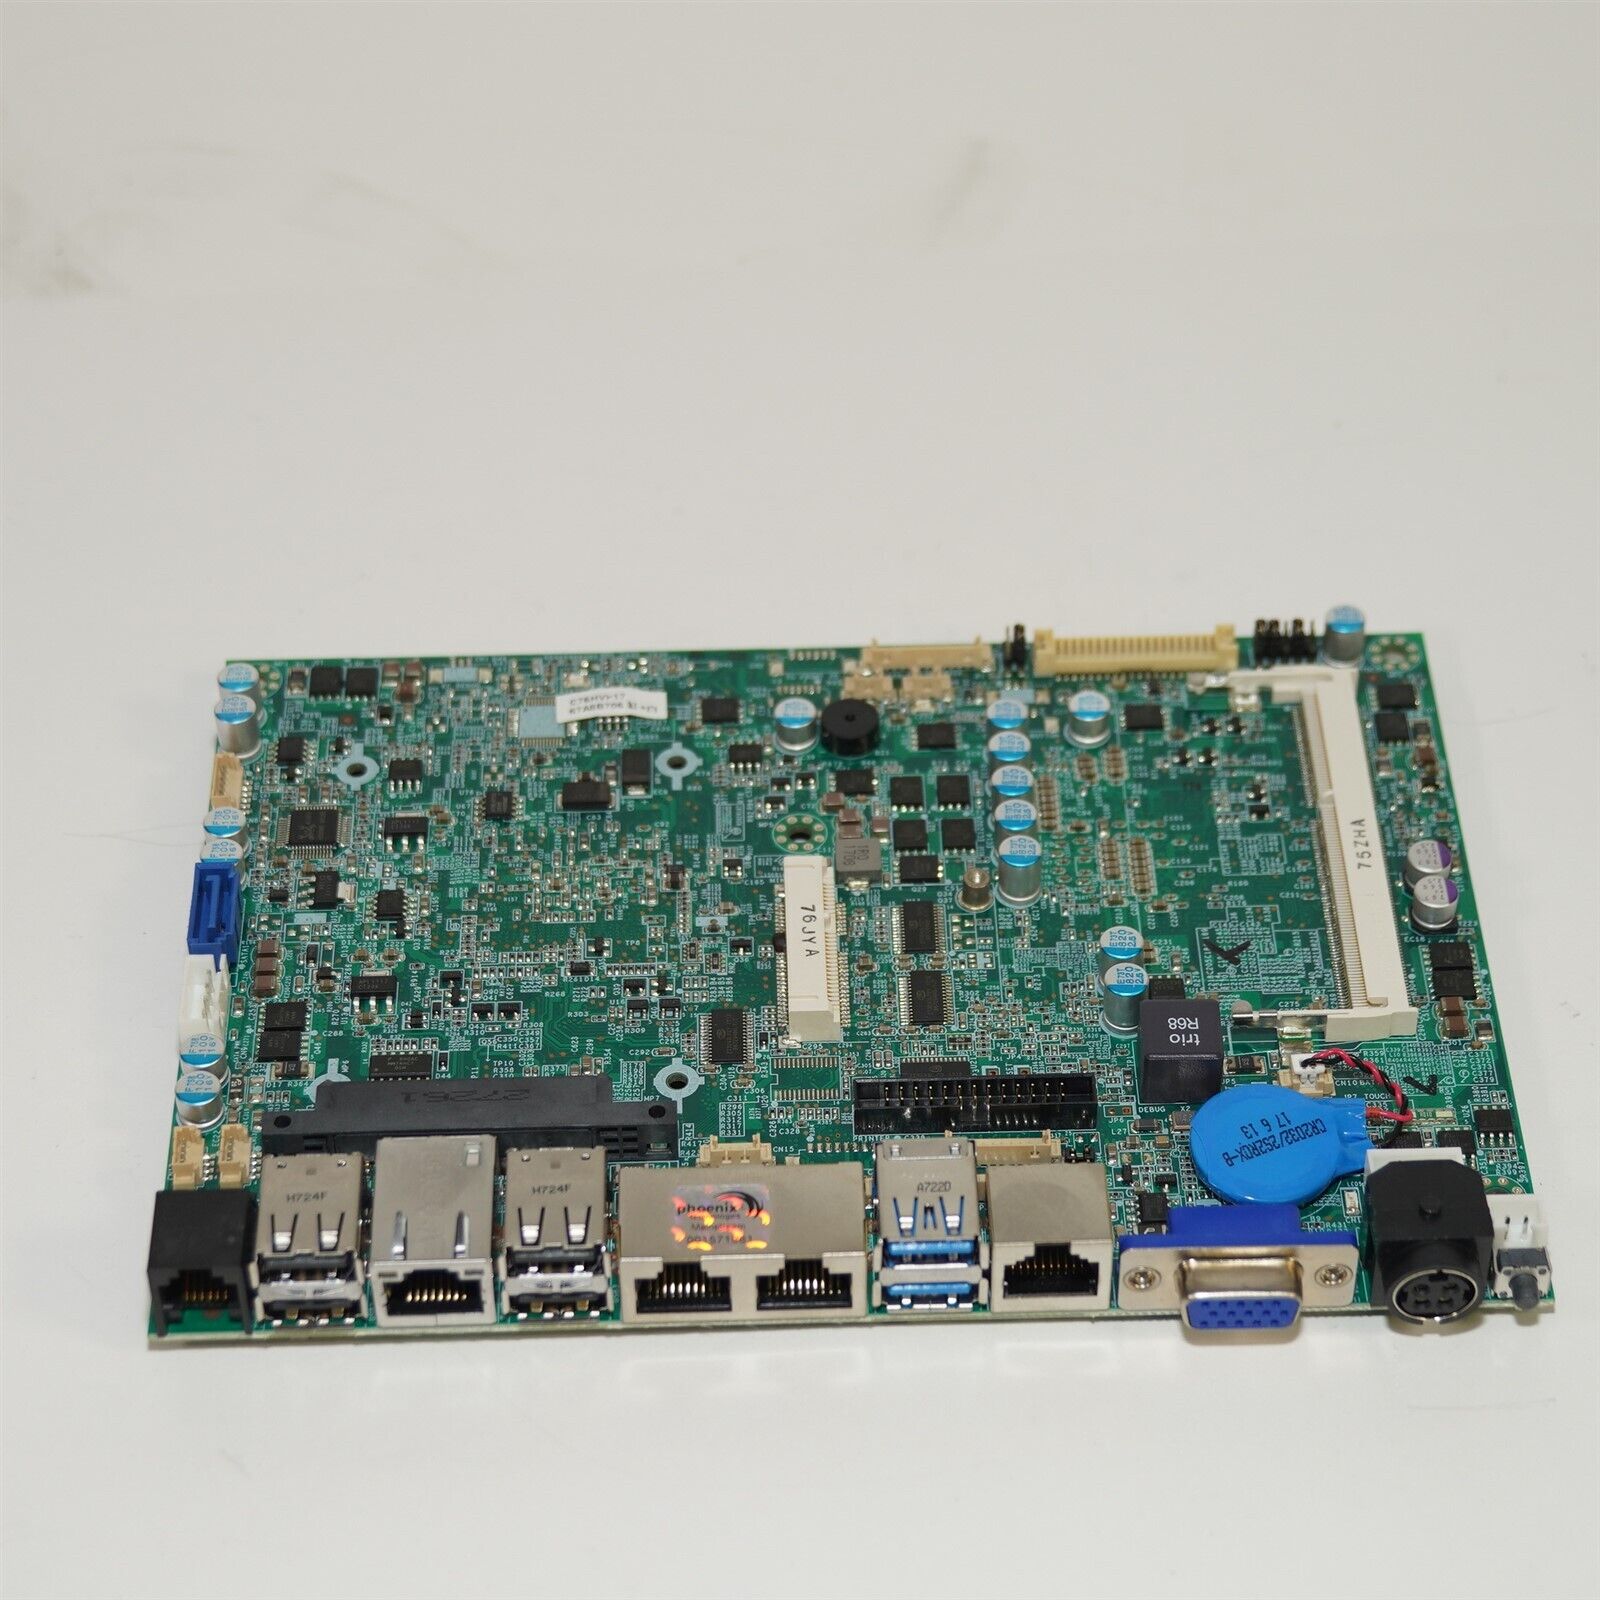 Poindus POSINNO 750P POS Main System Board Motherboard with i3-3217U 1.8GHz 